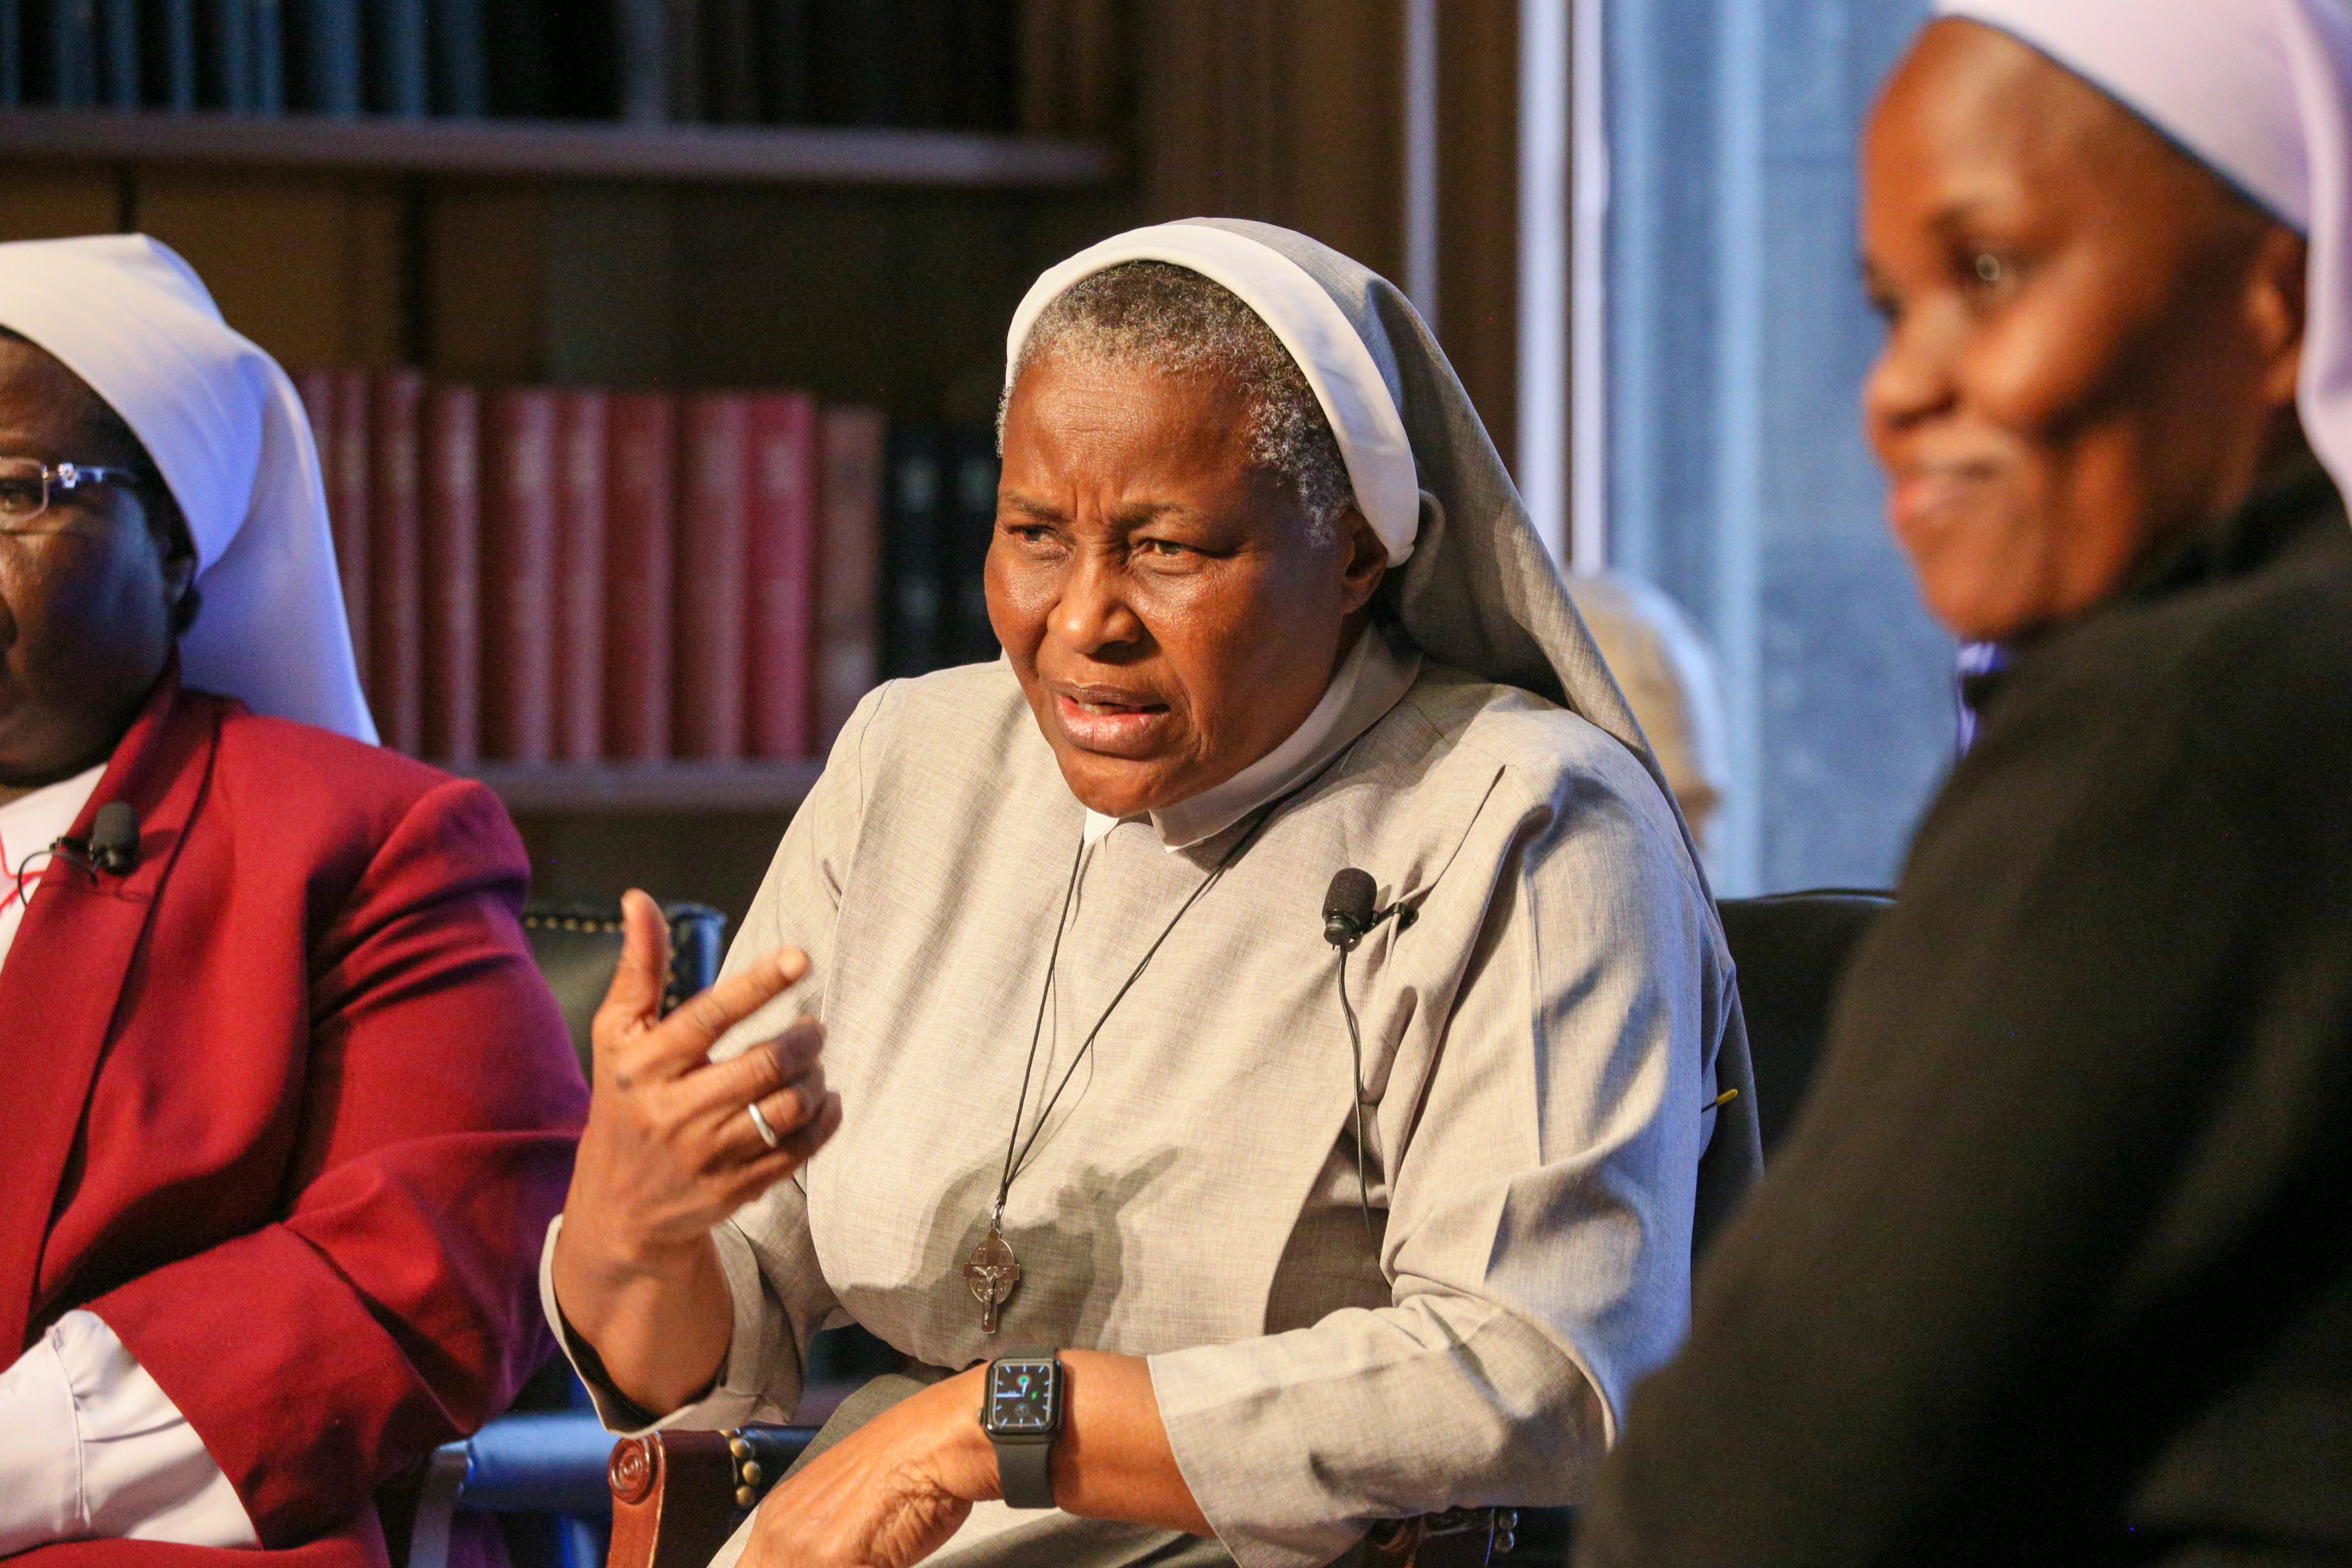 Sr. Francisca Ngozi Uti of Nigeria, center, makes a point during an April 25 forum at Georgetown University. She is flanked by Ugandan Srs. Rosemary Nyirumbe, left,  and Sr. Hedwig Muse. All are participants in the first cohort of the Women in Faith Leadership Fellowship, a jointly-sponsored program whose aim is to raise “the visibility, vitality and voice of Catholic sisters.” (Courtesy of Georgetown University)